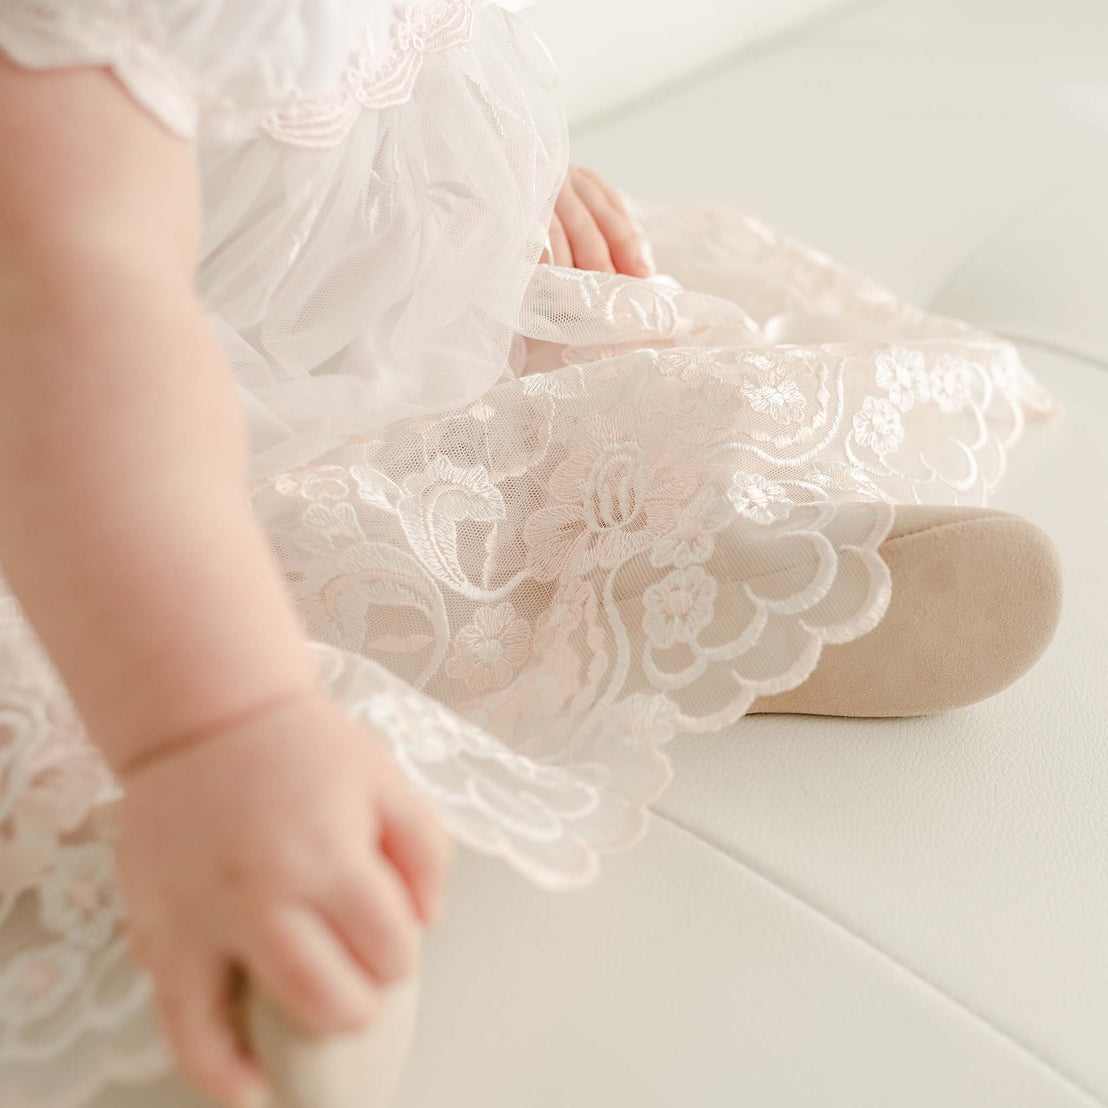 A close-up view of a baby in a Joli Romper Dress for baptism, focusing on the detailed fabric and the baby's hand gently touching the dress.